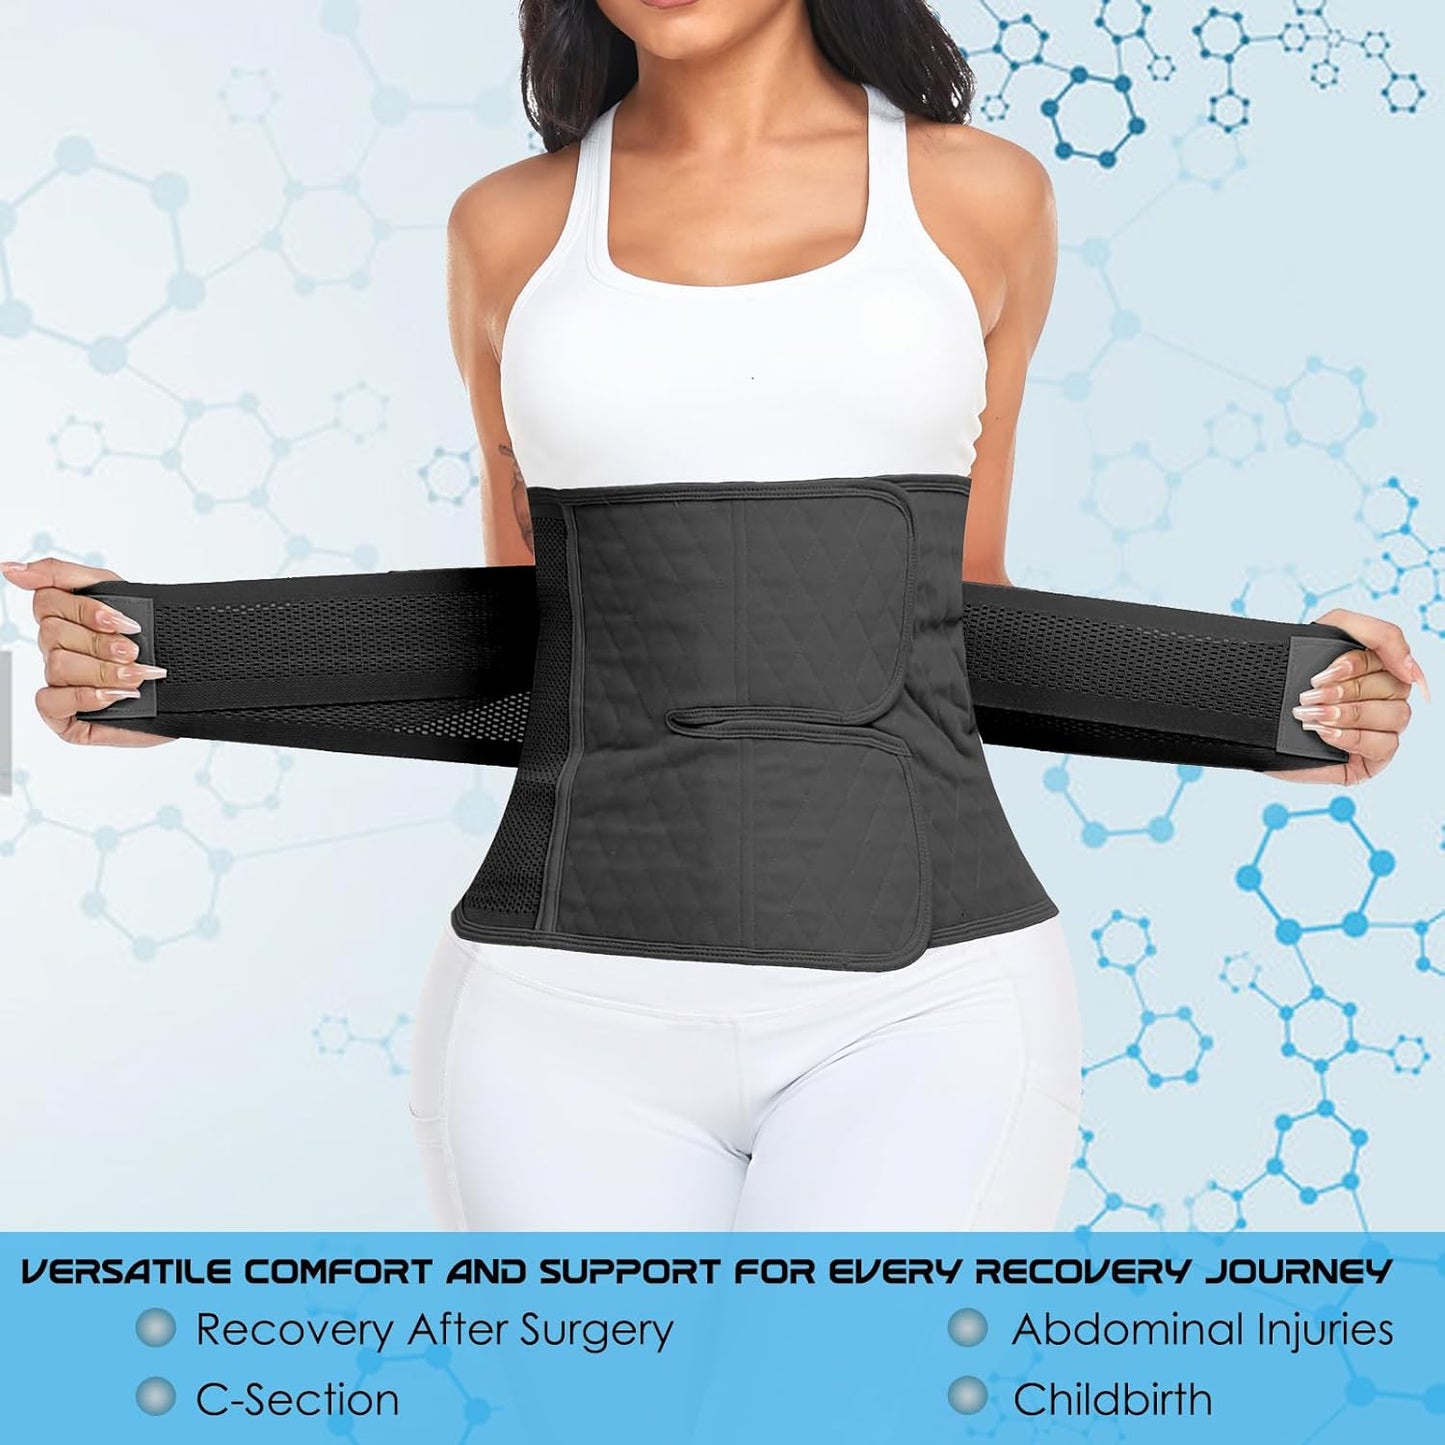 Postpartum Belly Band Support Recovery Wrap, Postpartum Essentials After Birth Brace, Slimming Girdles, Body Shaper Waist Shapewear, Post Surgery Pregnancy Belly Support Band (Large, 1-Black)